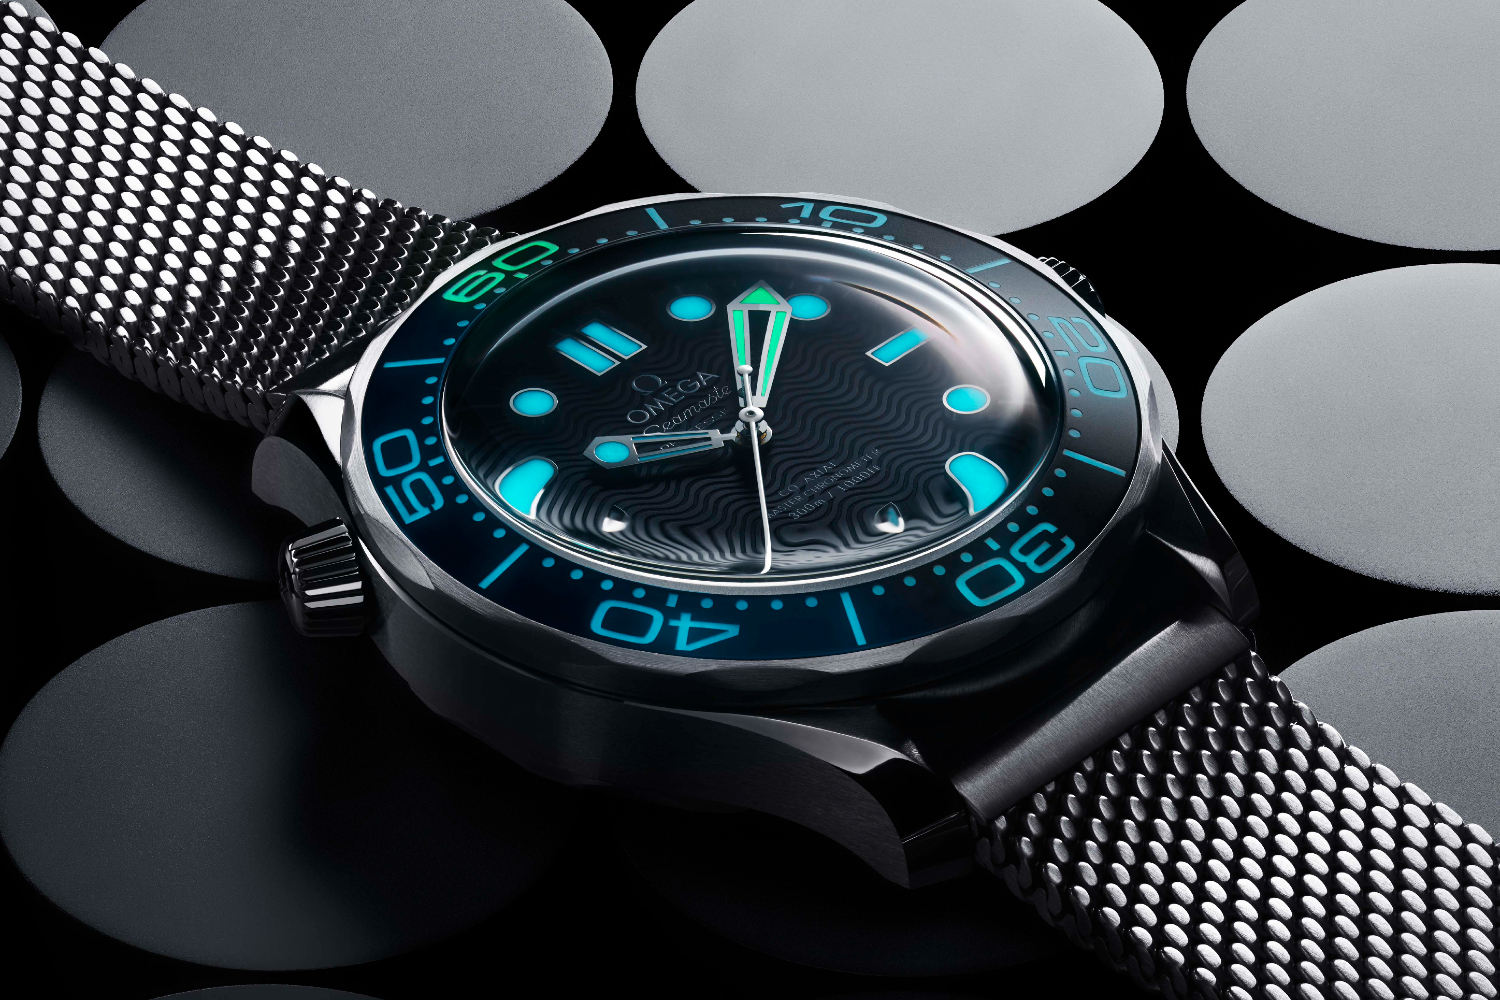 A shot of the Omega Seamaster Diver 300M James Bond showing the glow-in-the-dark details